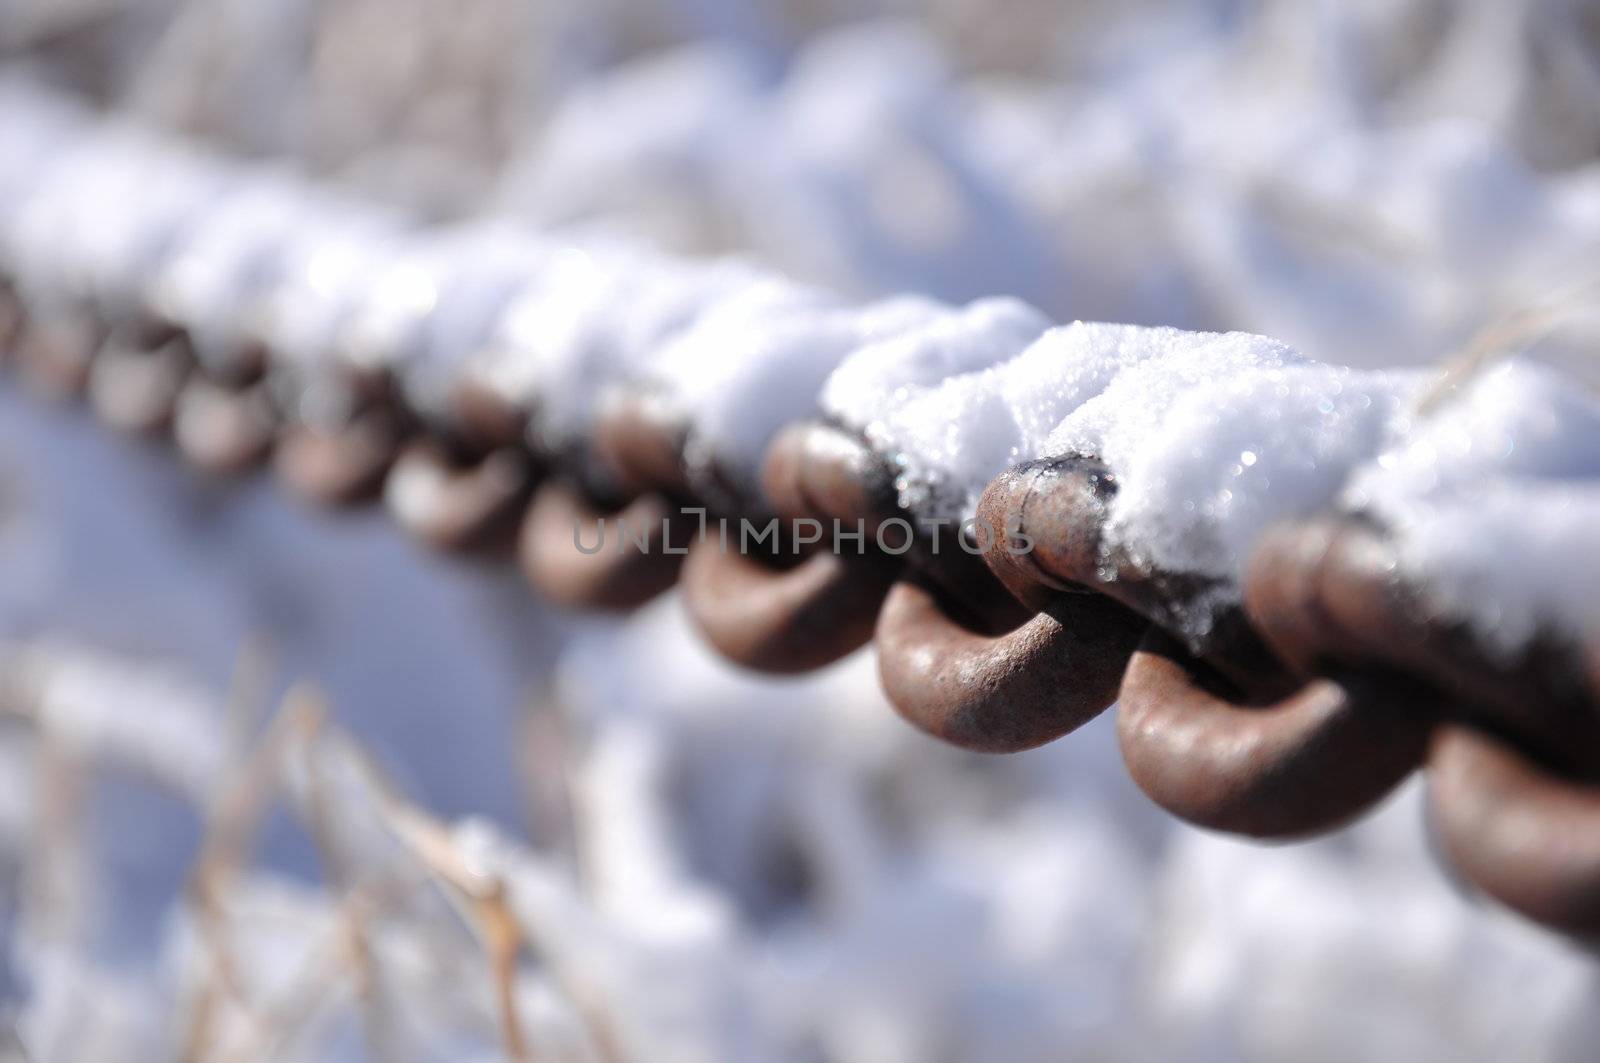 A rusty old chain covered in fresh snow on a sunny wintry day.